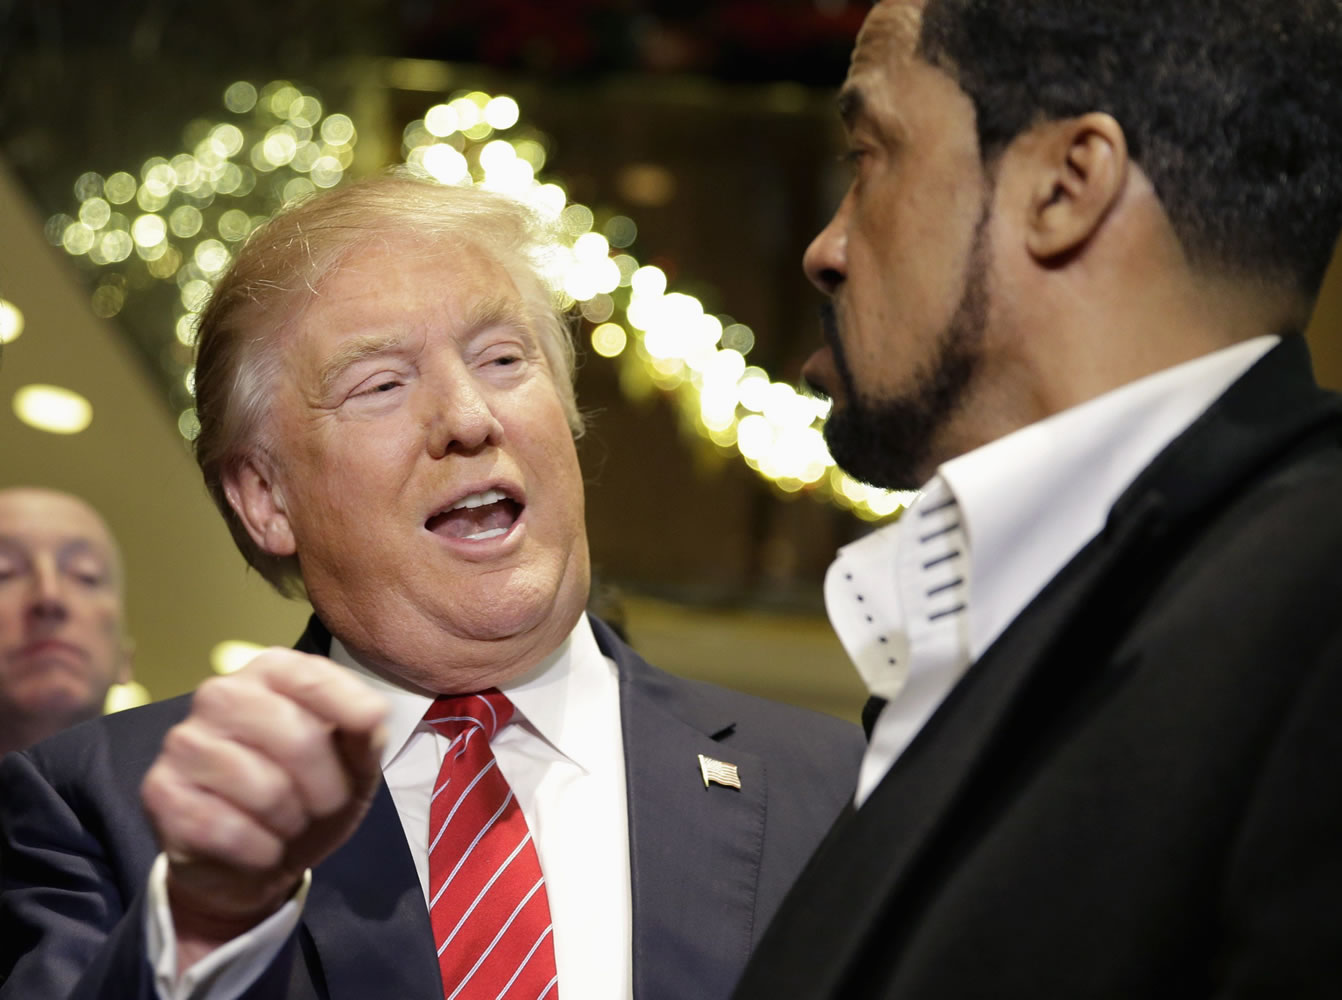 Republican presidential candidate Donald Trump, left, talks to Pastor Darrell Scott while surrounded by reporters Monday in New York. Trump met with a coalition of 100 African-American evangelical pastors and religious leaders in a private meeting at Trump Tower.